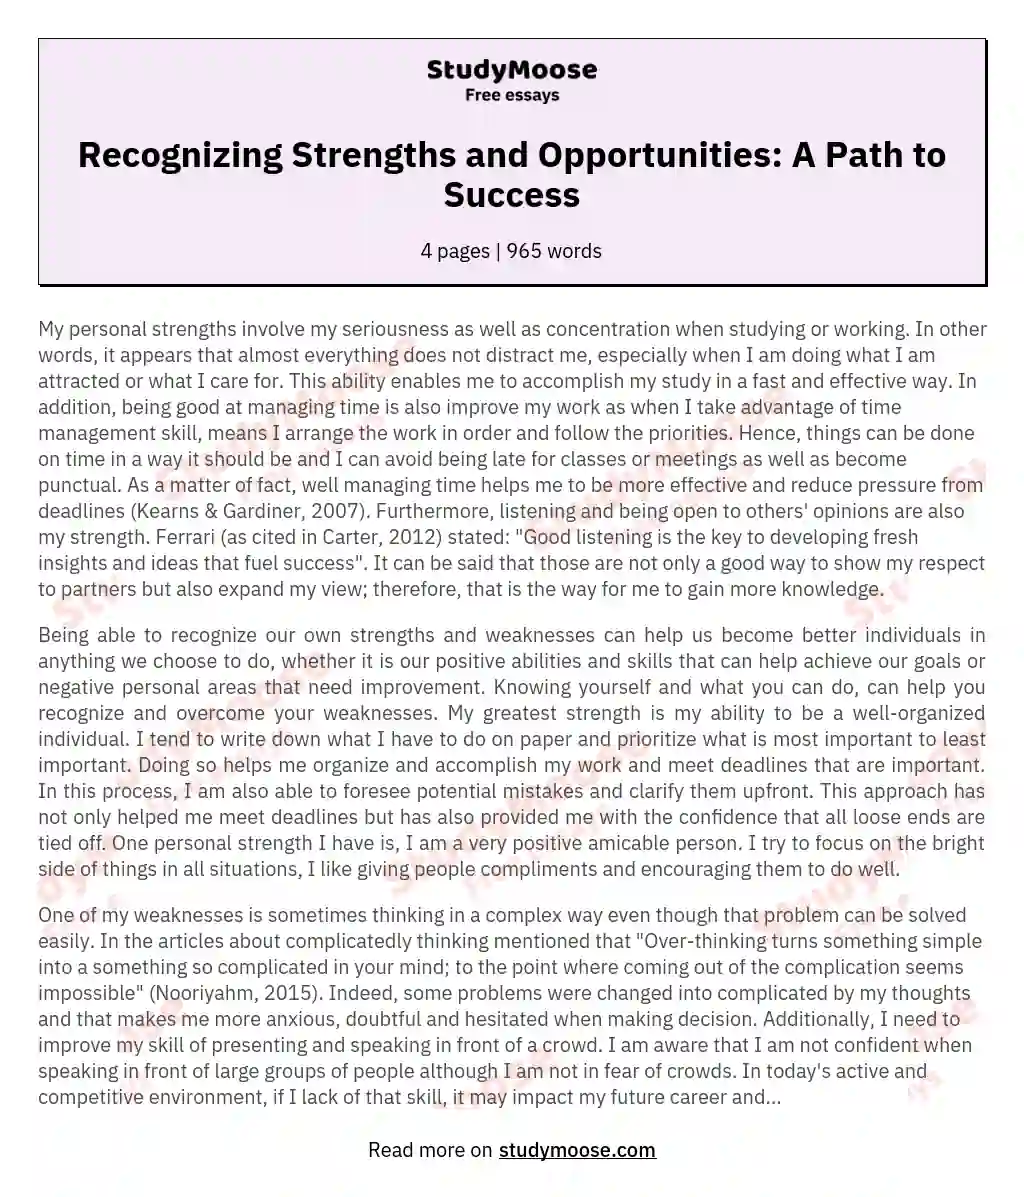 Recognizing Strengths and Opportunities: A Path to Success essay